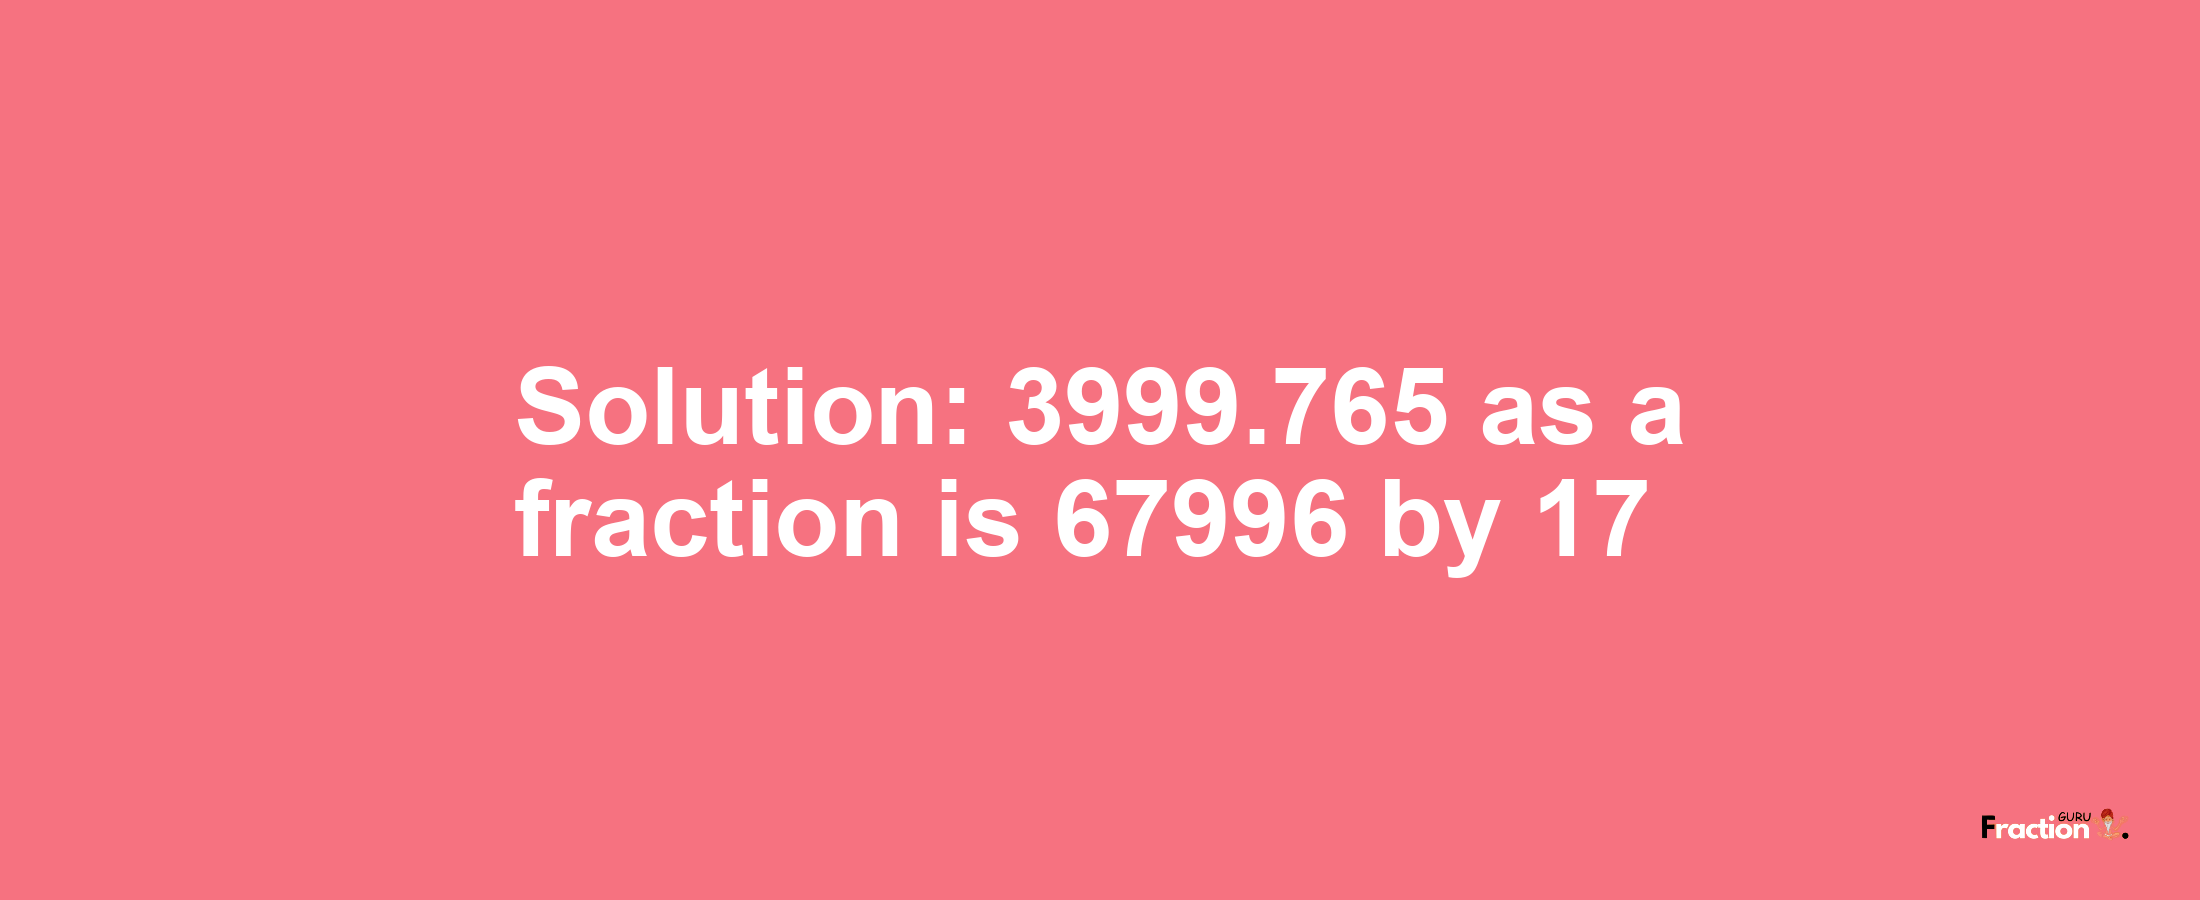 Solution:3999.765 as a fraction is 67996/17